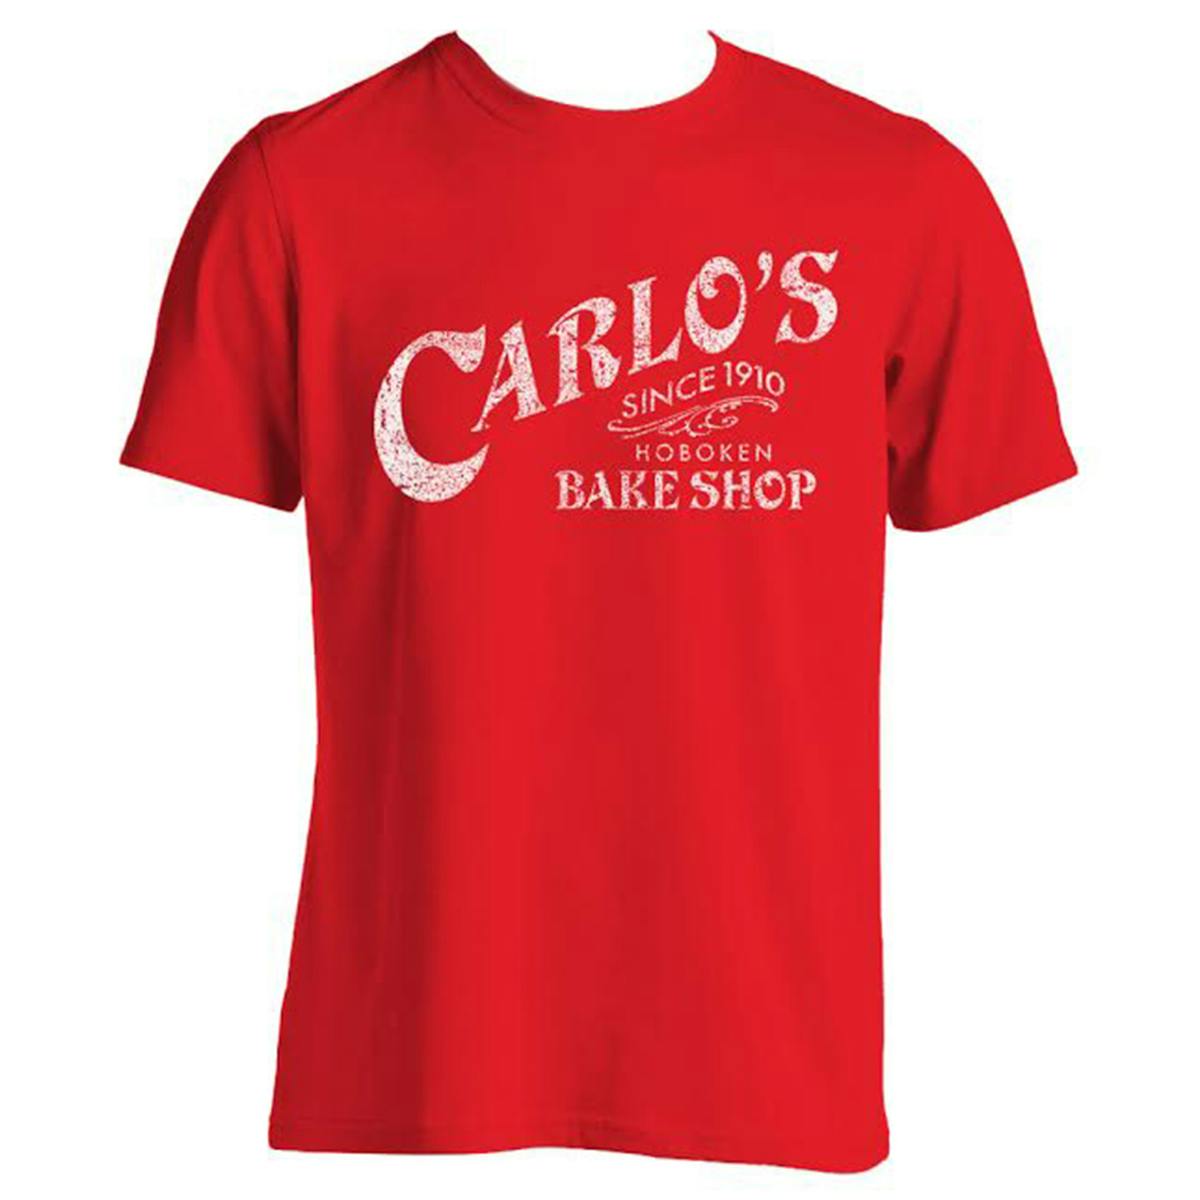 Premium Red T-Shirt by Carlo's Bakery 